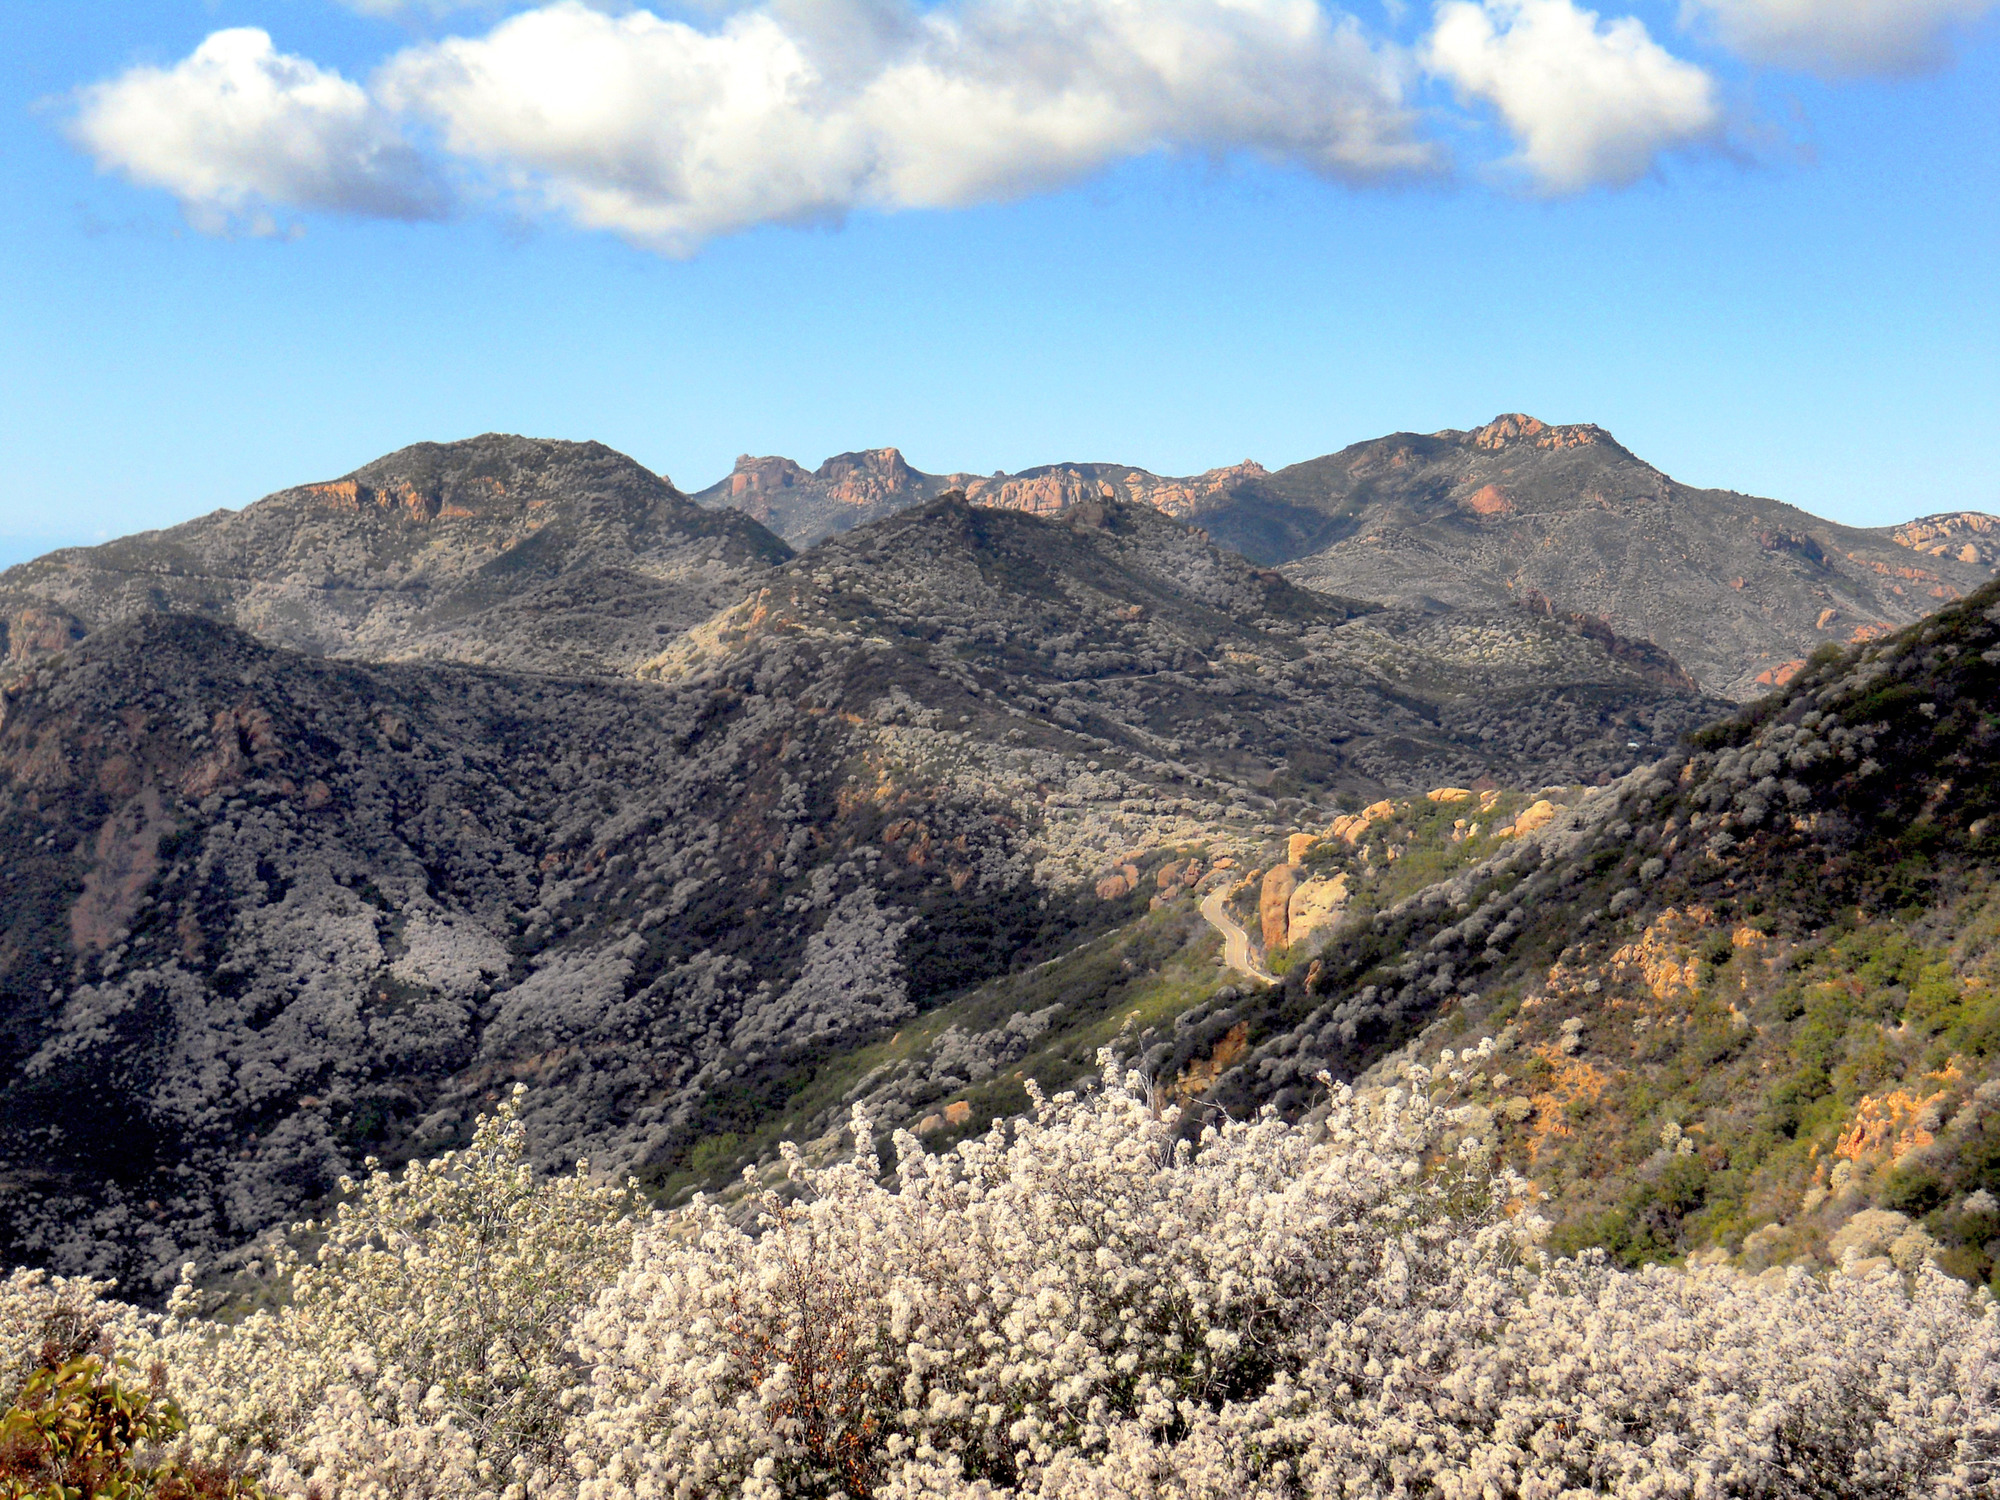 View across a mountainous landscape covered in the white blooms of ceanothus shrubs